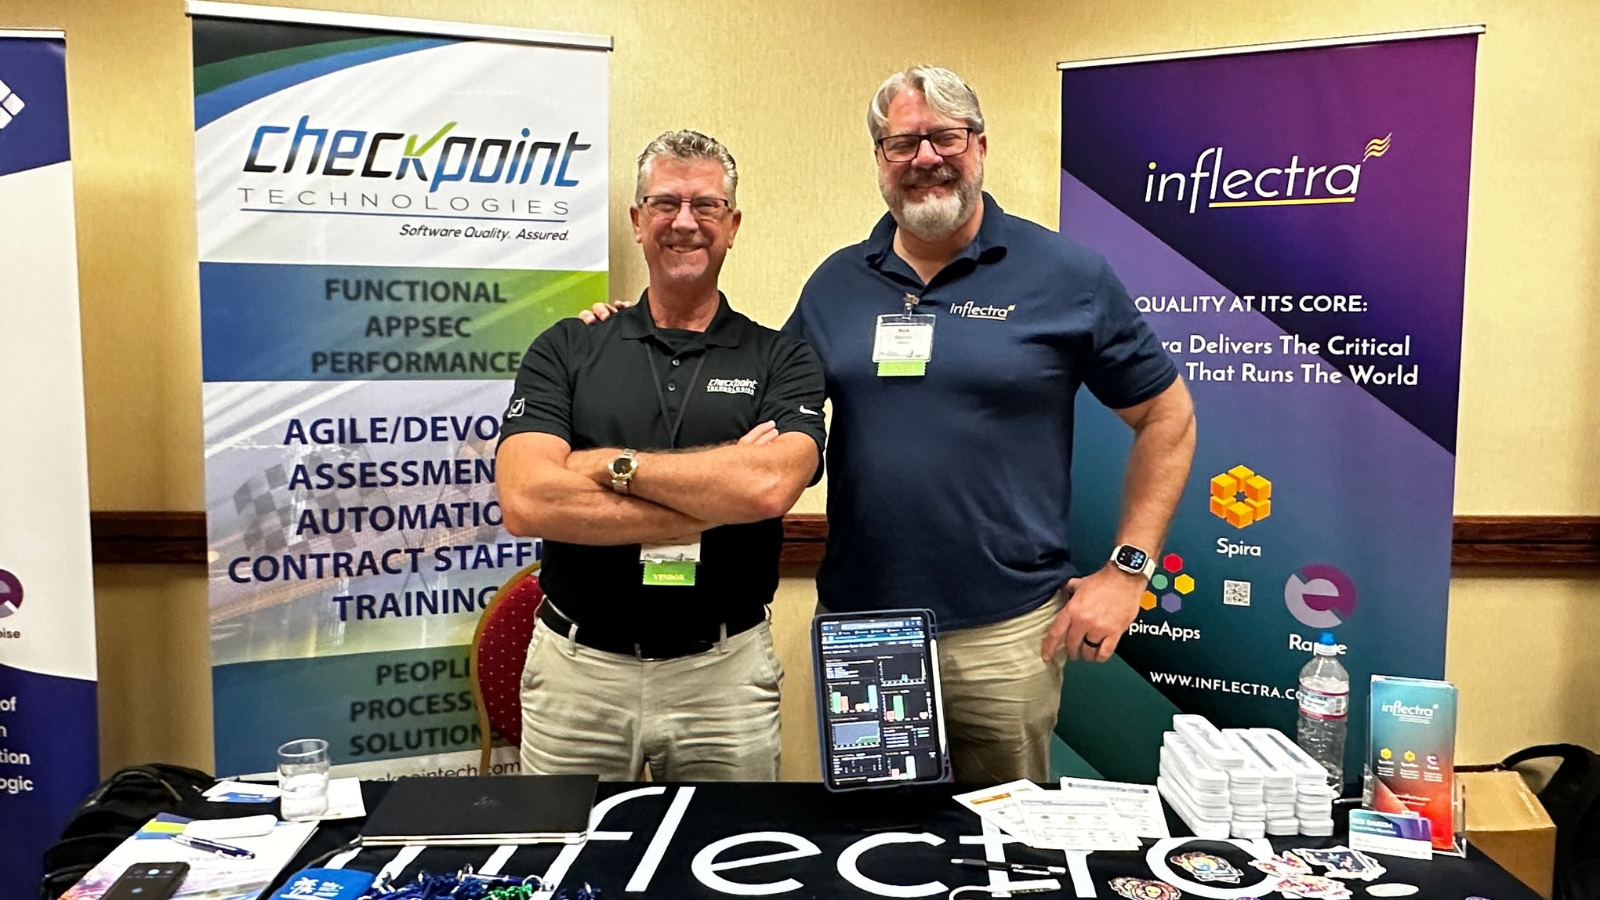 rick-baucom-from-inflectra-and-bob-crews-from-checkpoint-technologies-at-pnsqc-in-portland-image